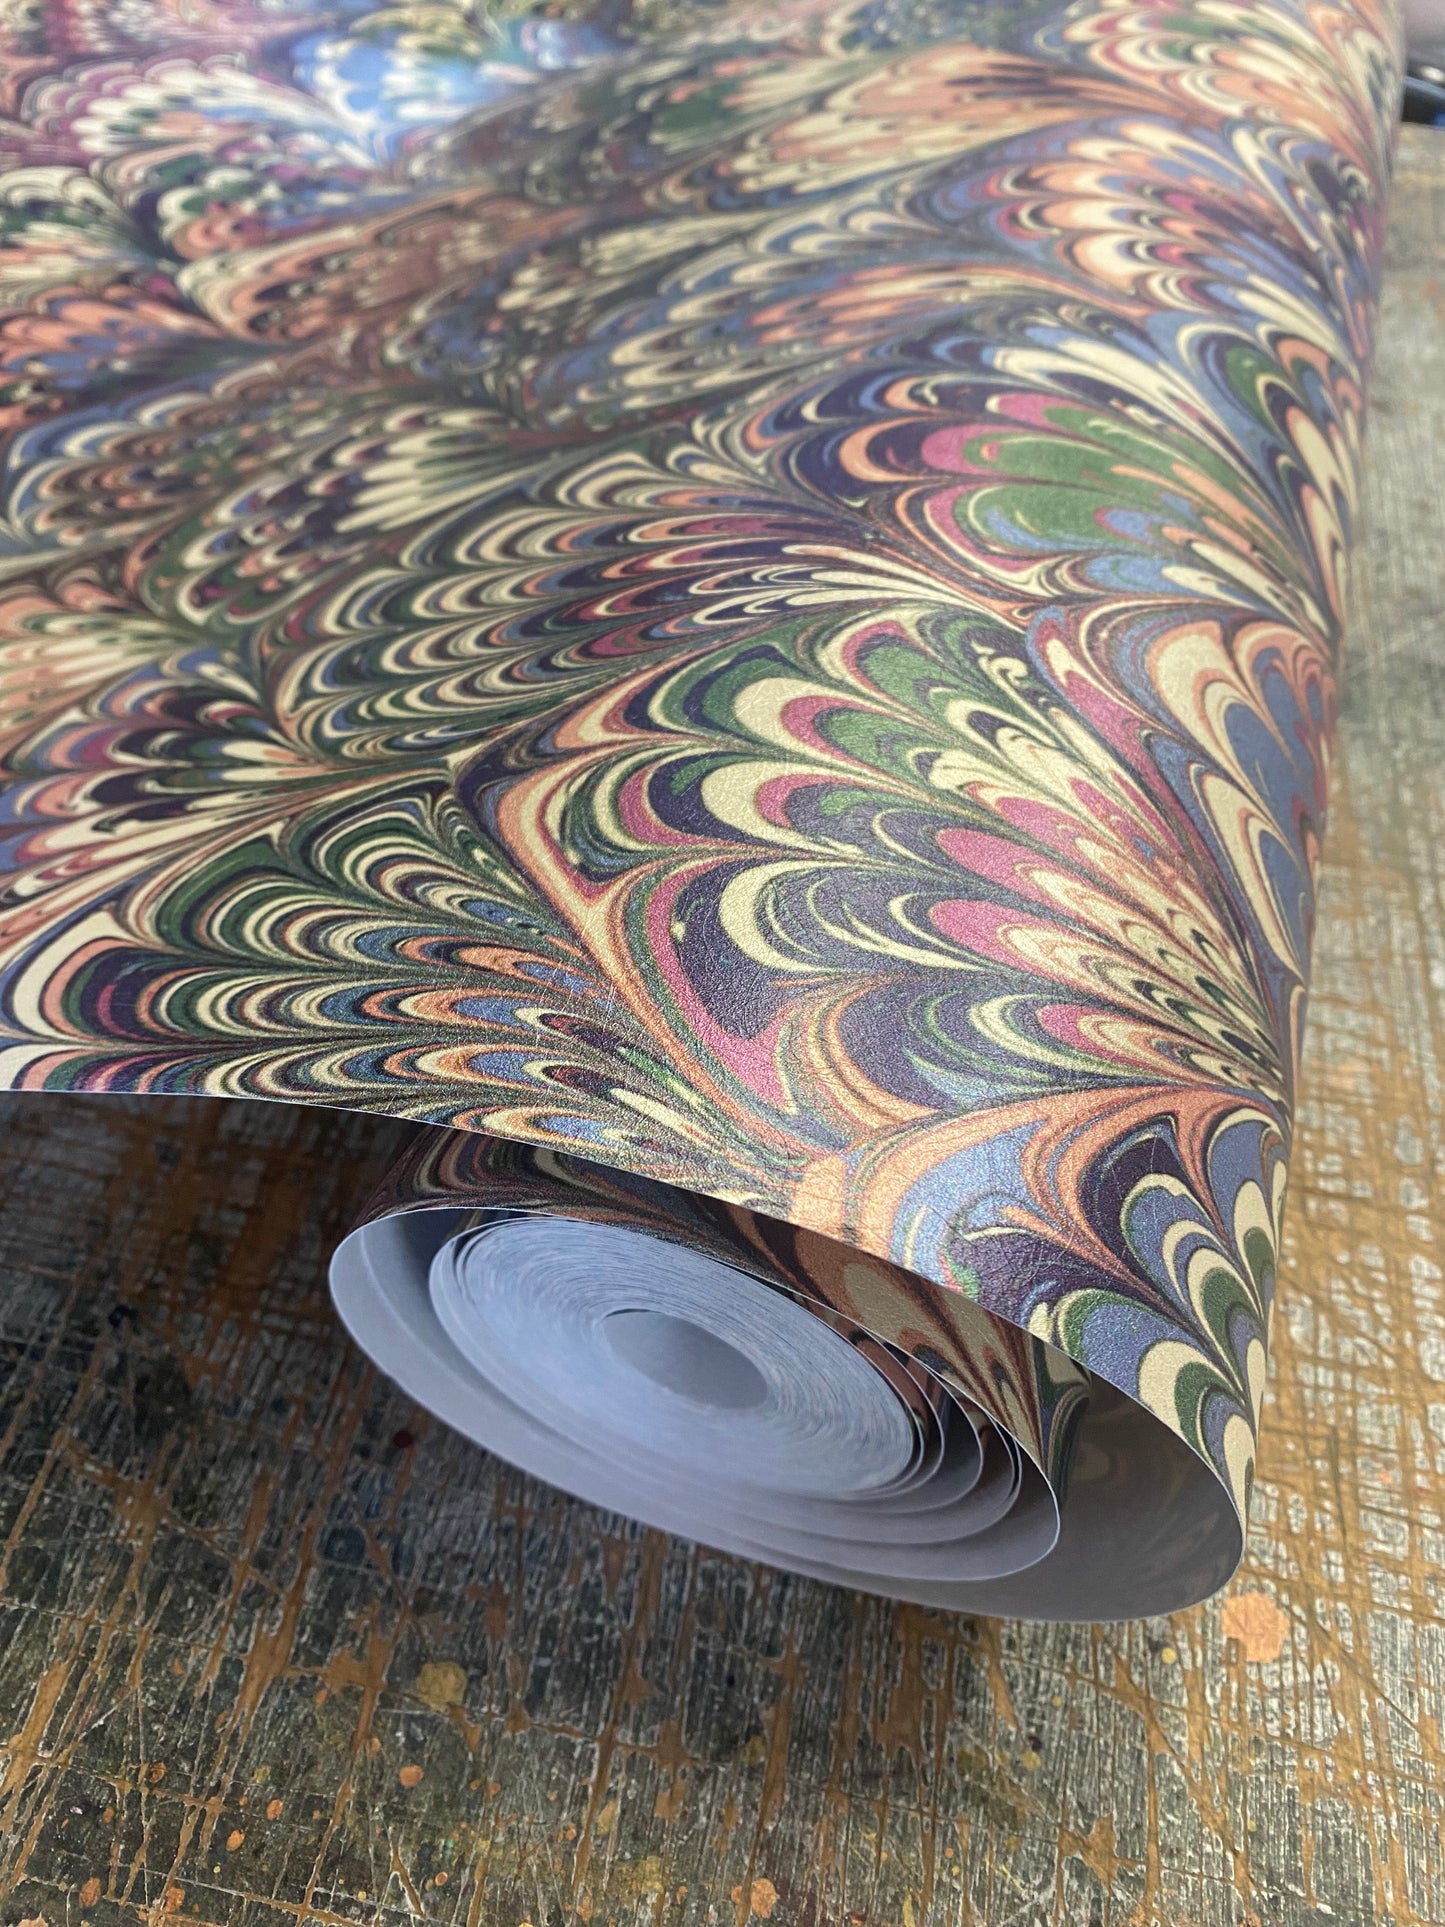 Marbled Wallpaper - 'Serpentine' Col: Summer- Mica Coated Non-Woven